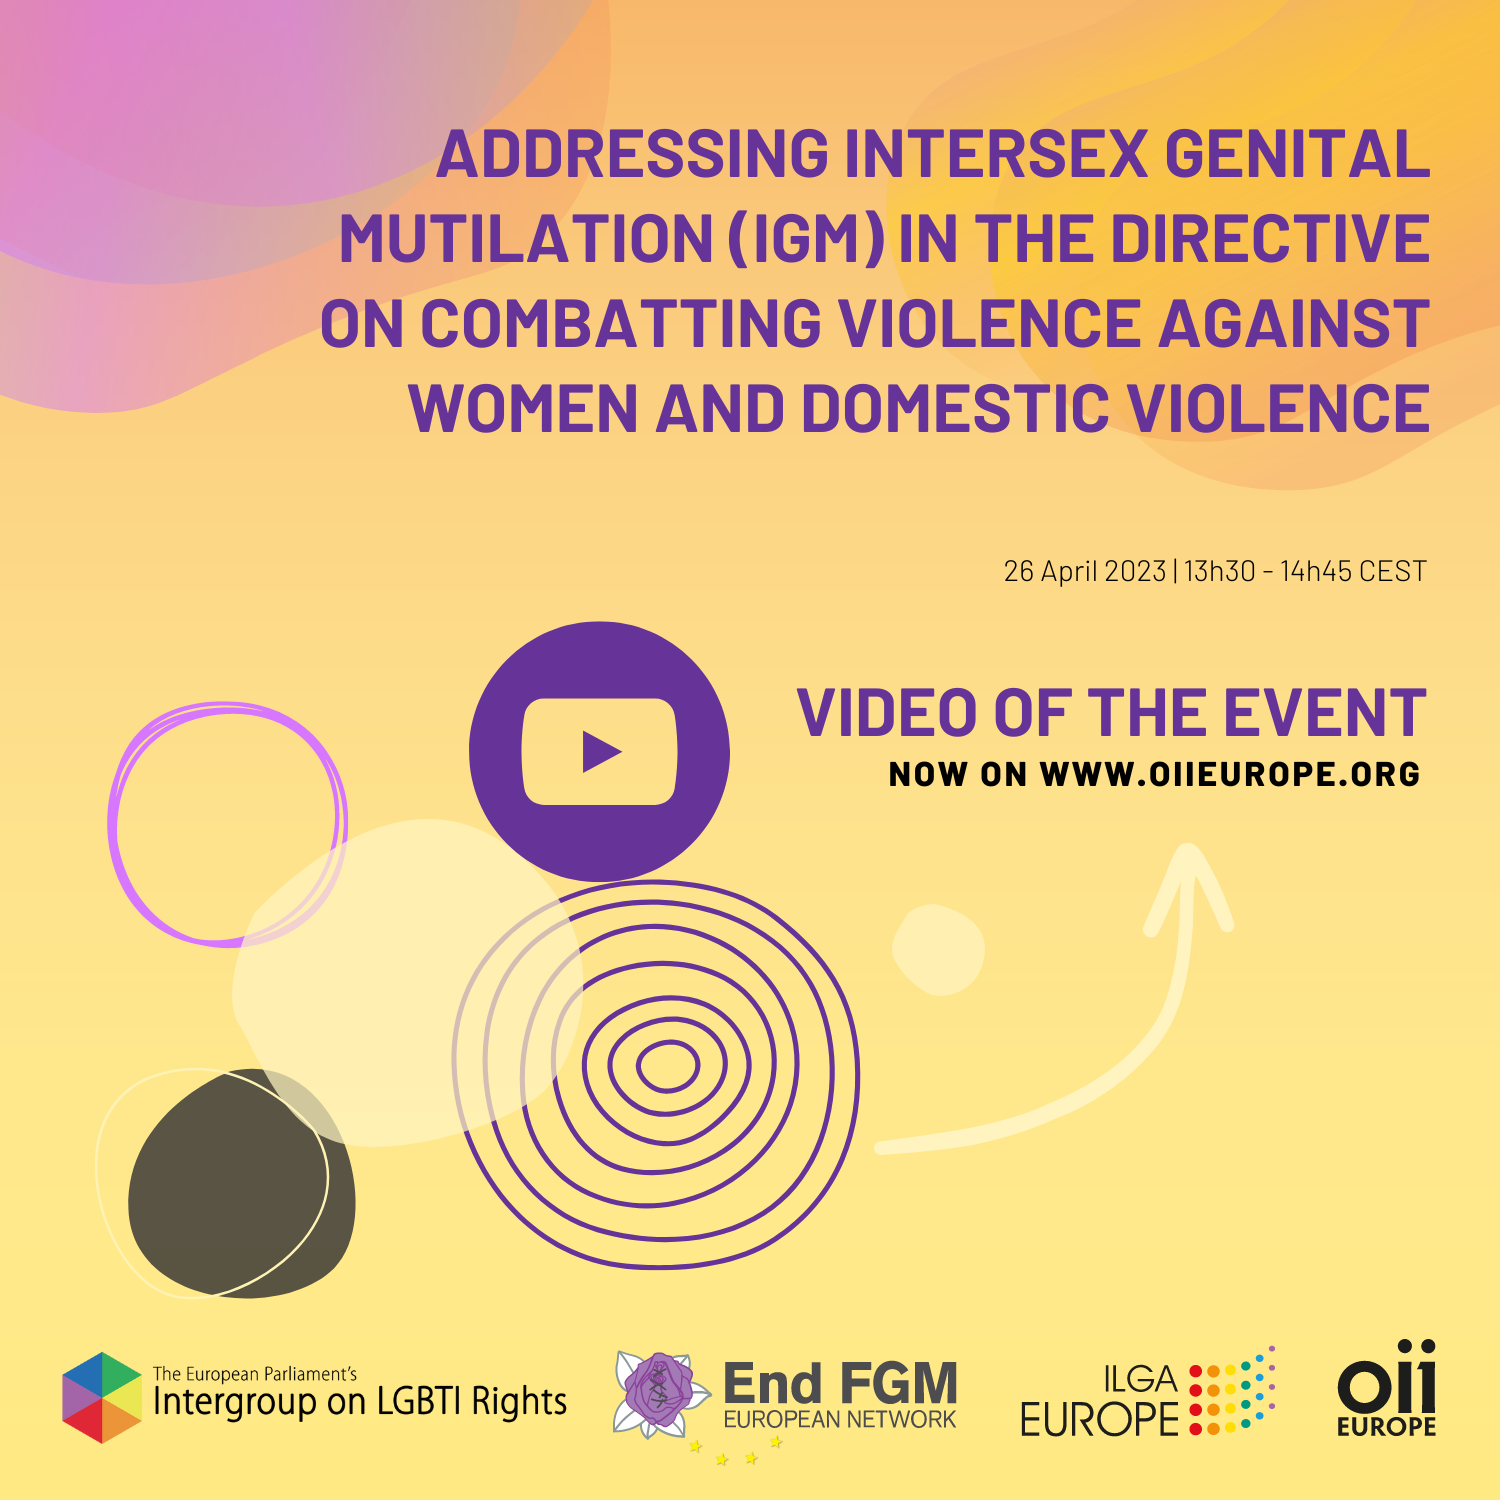 Recording of the Event at the European Parliament on VAW and DV